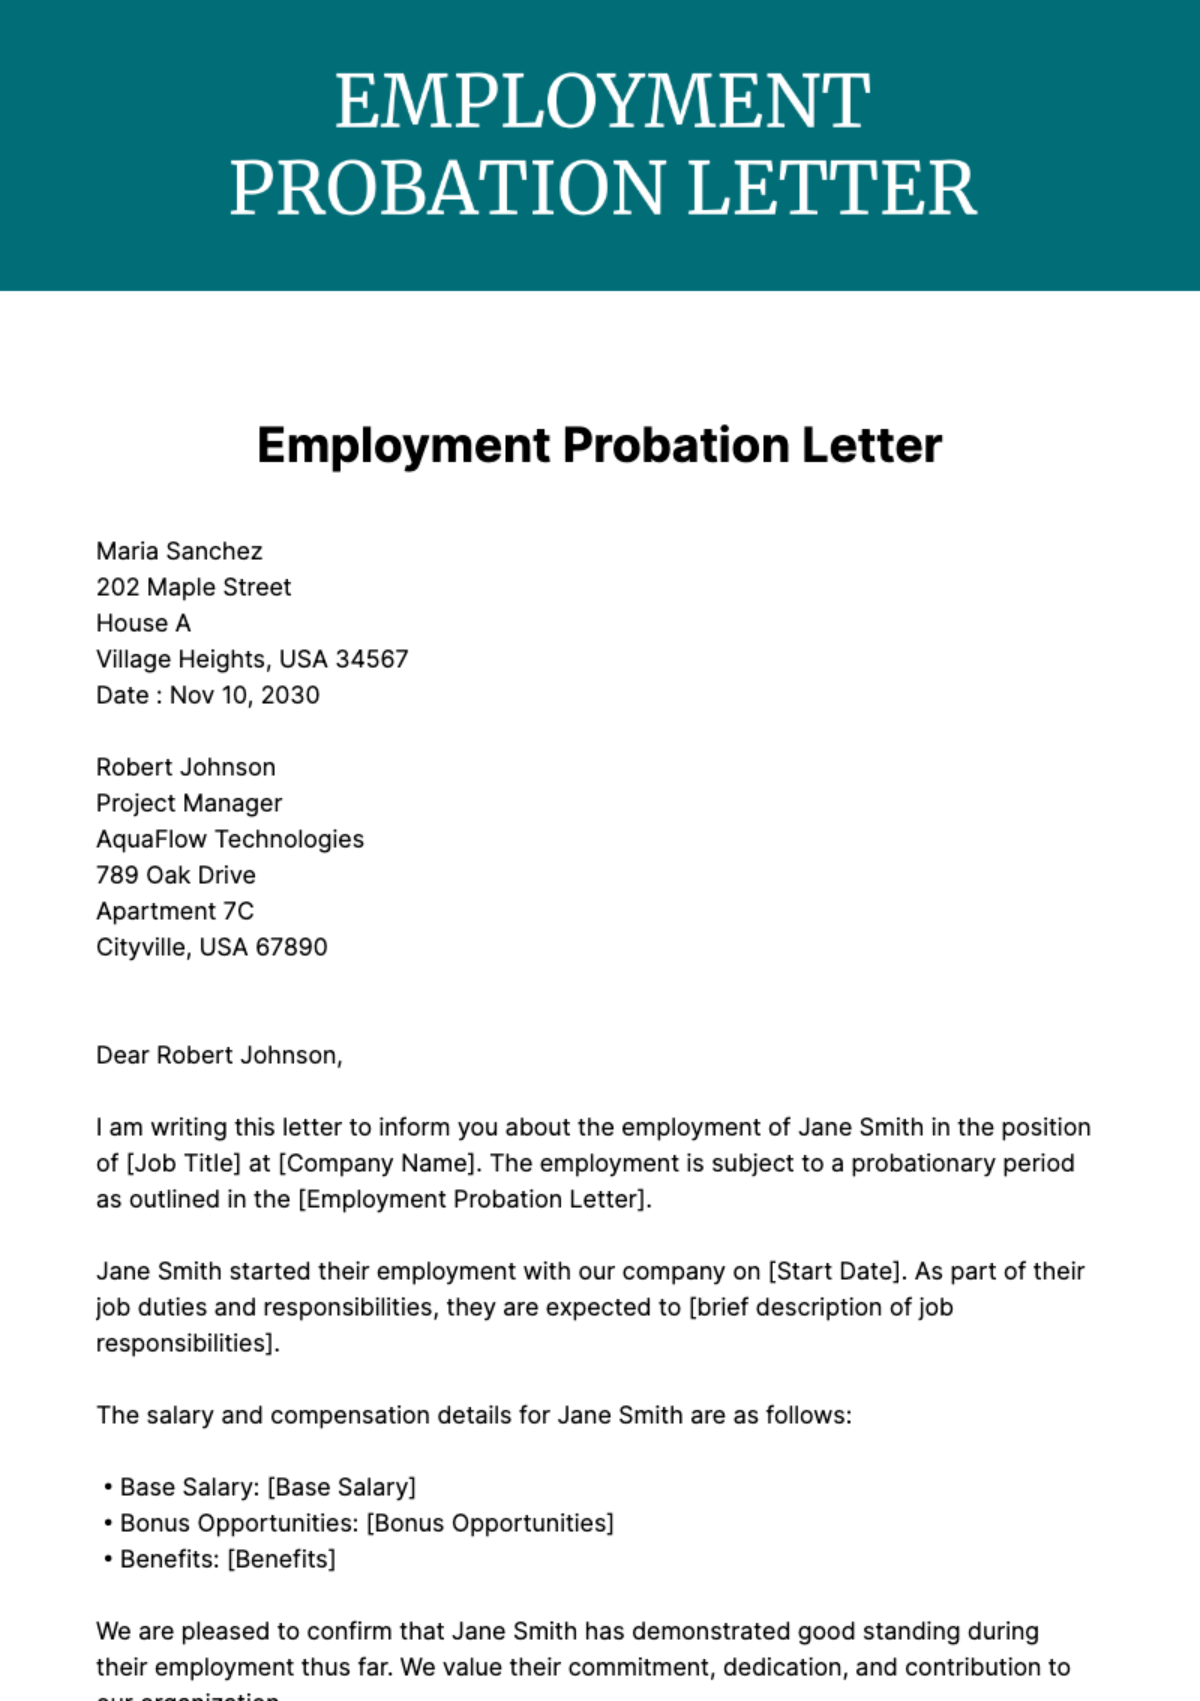 Free Employment Probation Letter Template